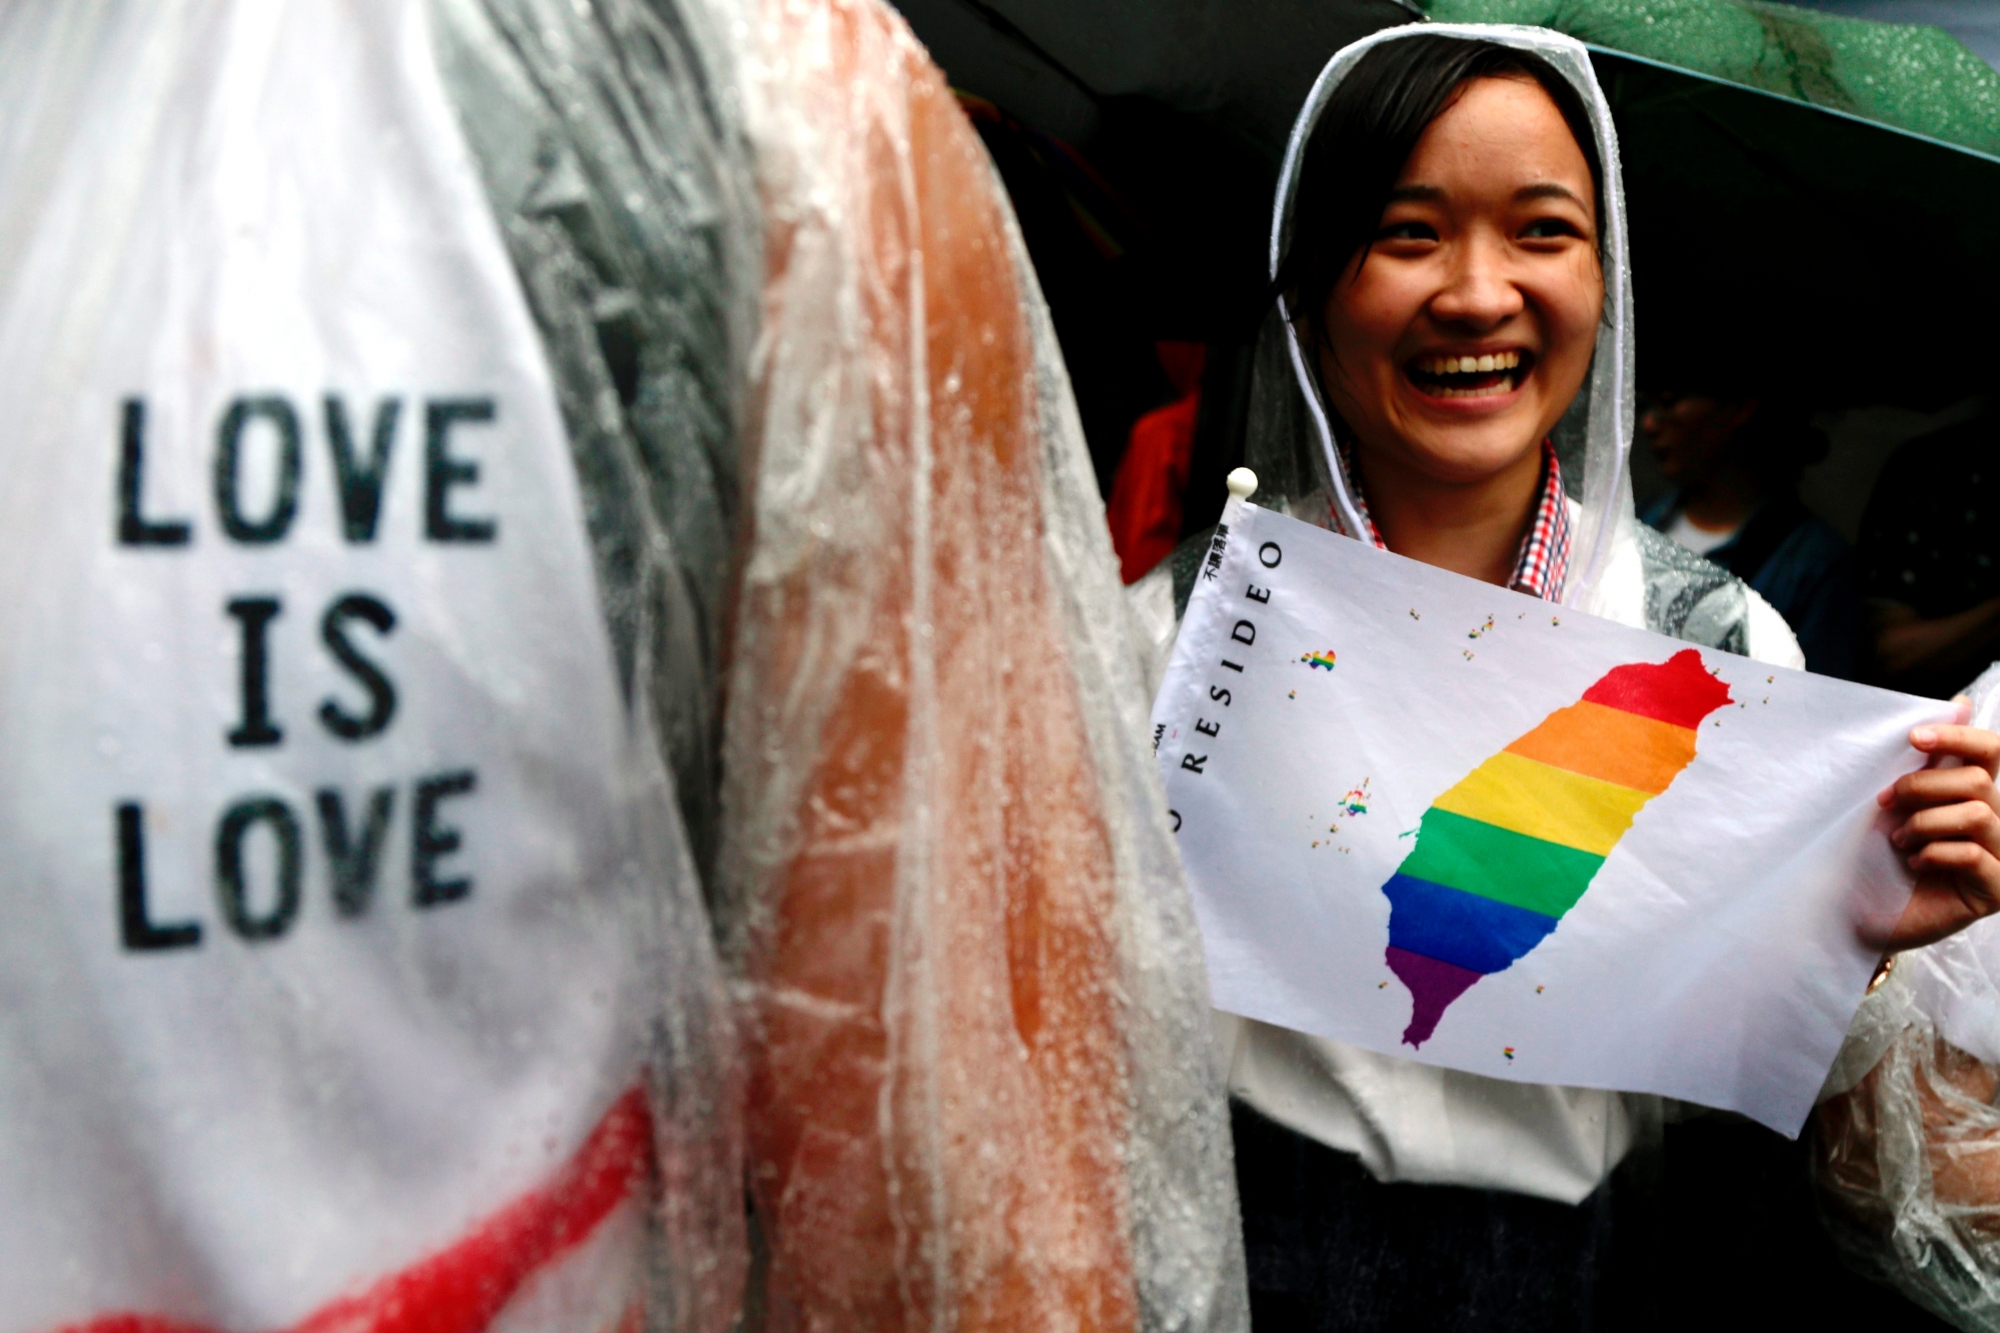 epaselect epa07577473 Supporters of same-sex marriage gather outside the parliament building as a bill for marriage equality is debated by parliamentarians in Taipei, Taiwan, 17 May 2019. According to news reports, on 24 May, Taiwan could become the first Asian country to legalize same-sex marriage. So far nearly 300 gay and lesbian couples have applied to register for legal union on the day the bill is to come into effect.  EPA/RITCHIE B. TONGO epaselect TAIWAN PARLIAMENT BILL LGBT